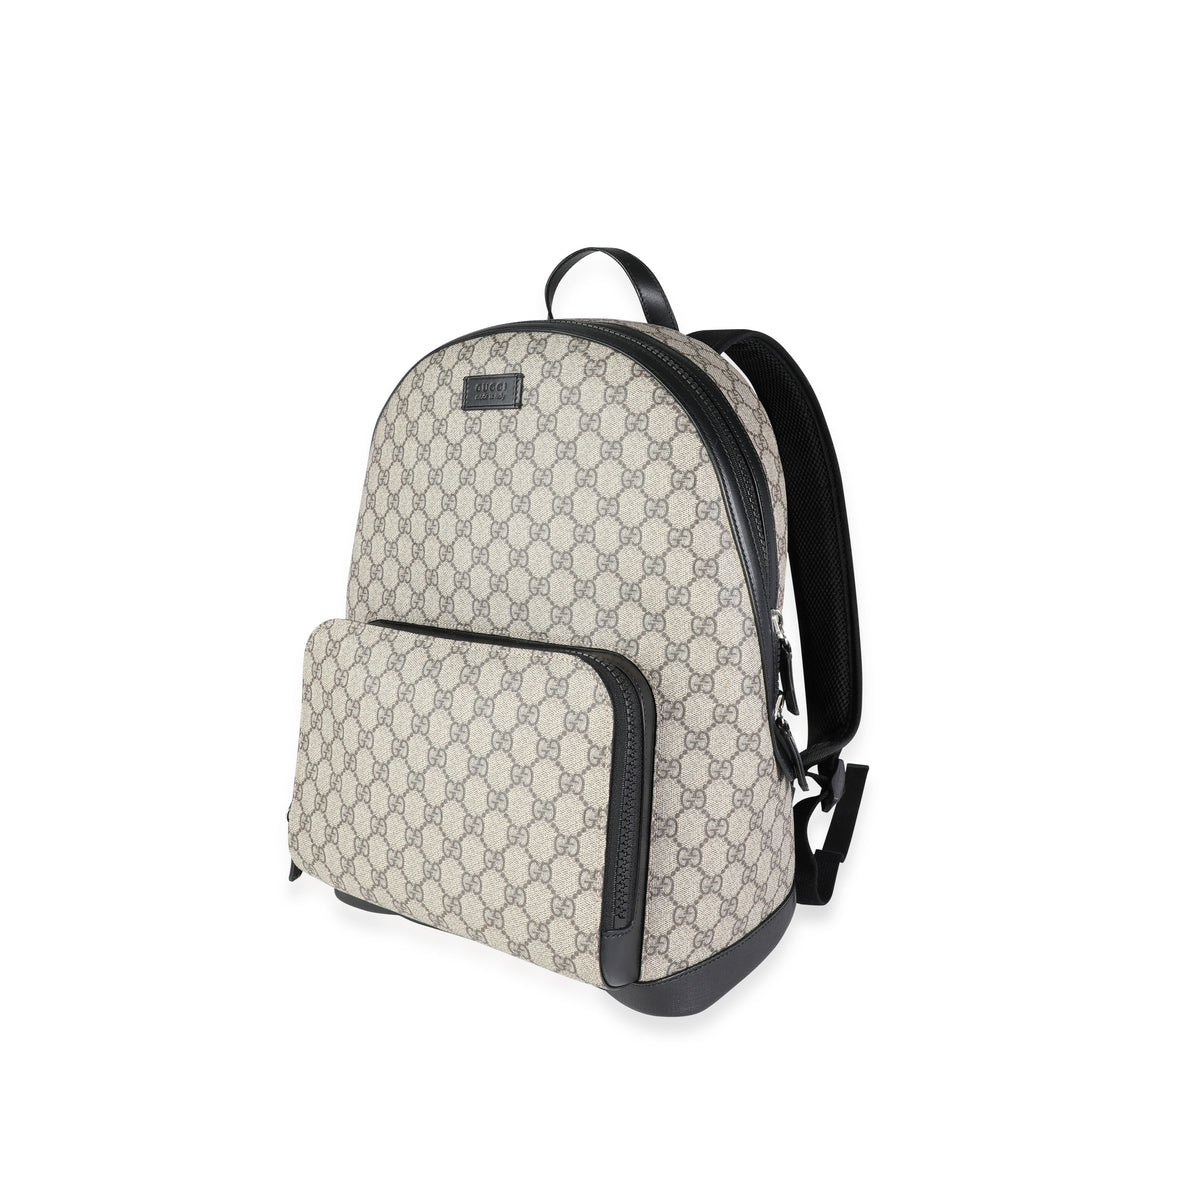 Gucci GG Supreme Canvas & Black Leather Small Eden Backpack